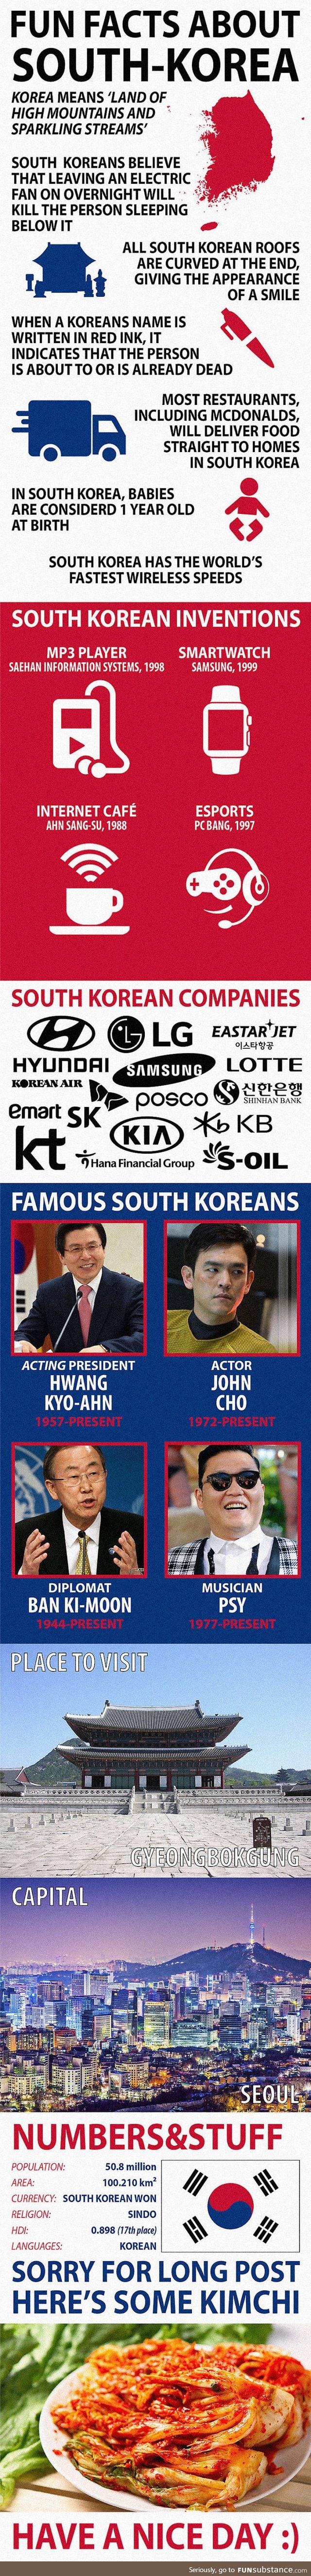 Fun Facts about South Korea